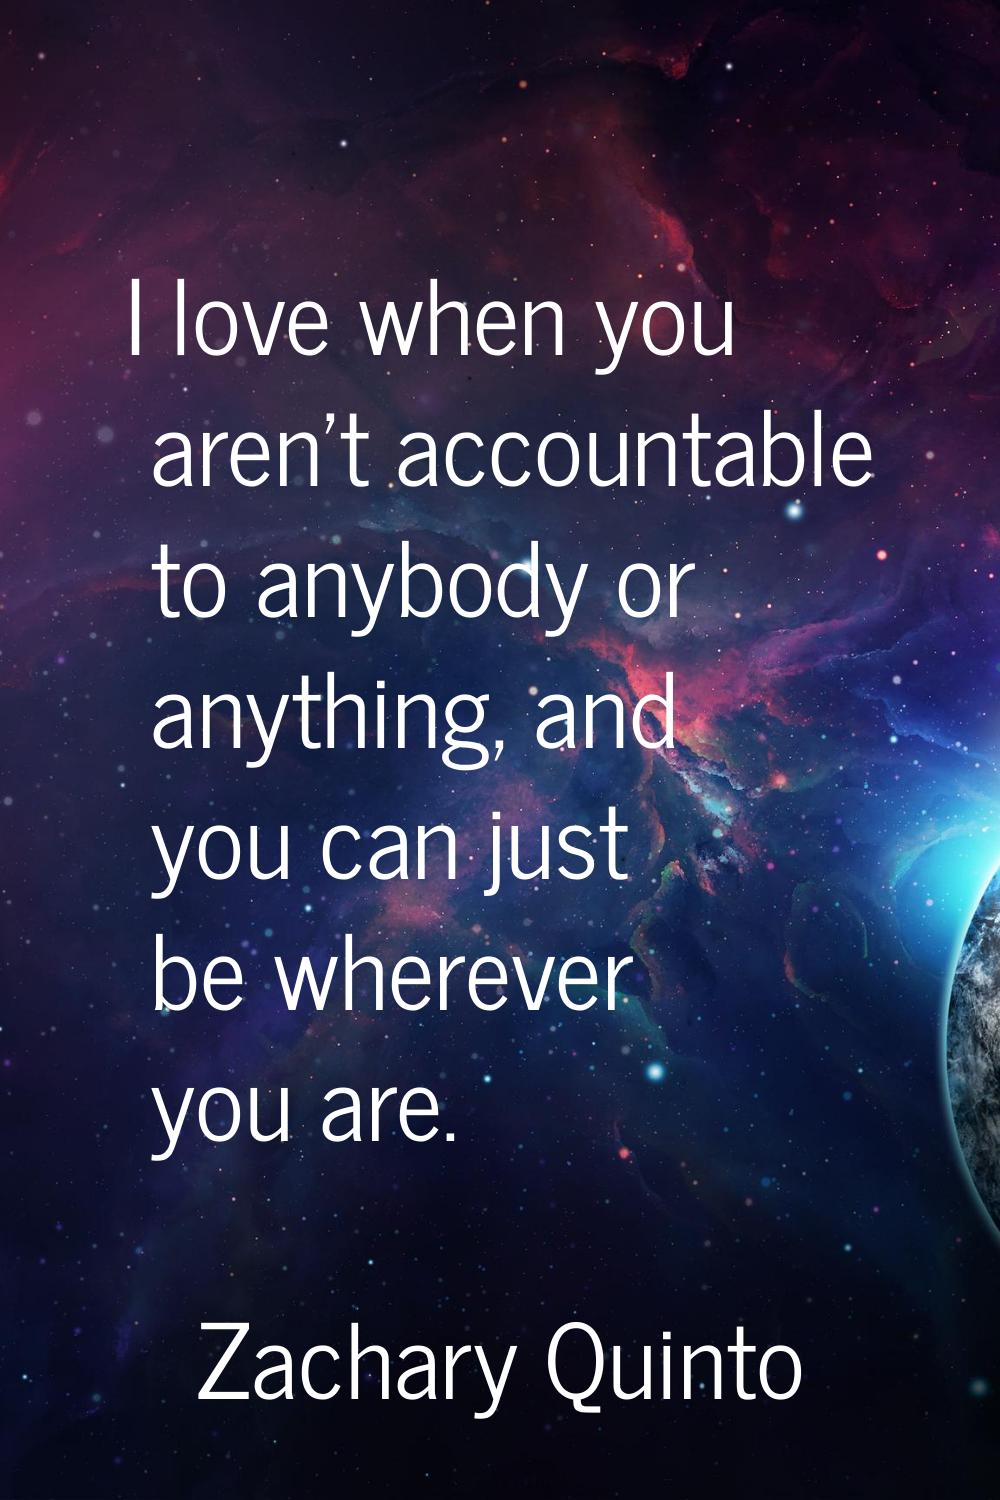 I love when you aren't accountable to anybody or anything, and you can just be wherever you are.